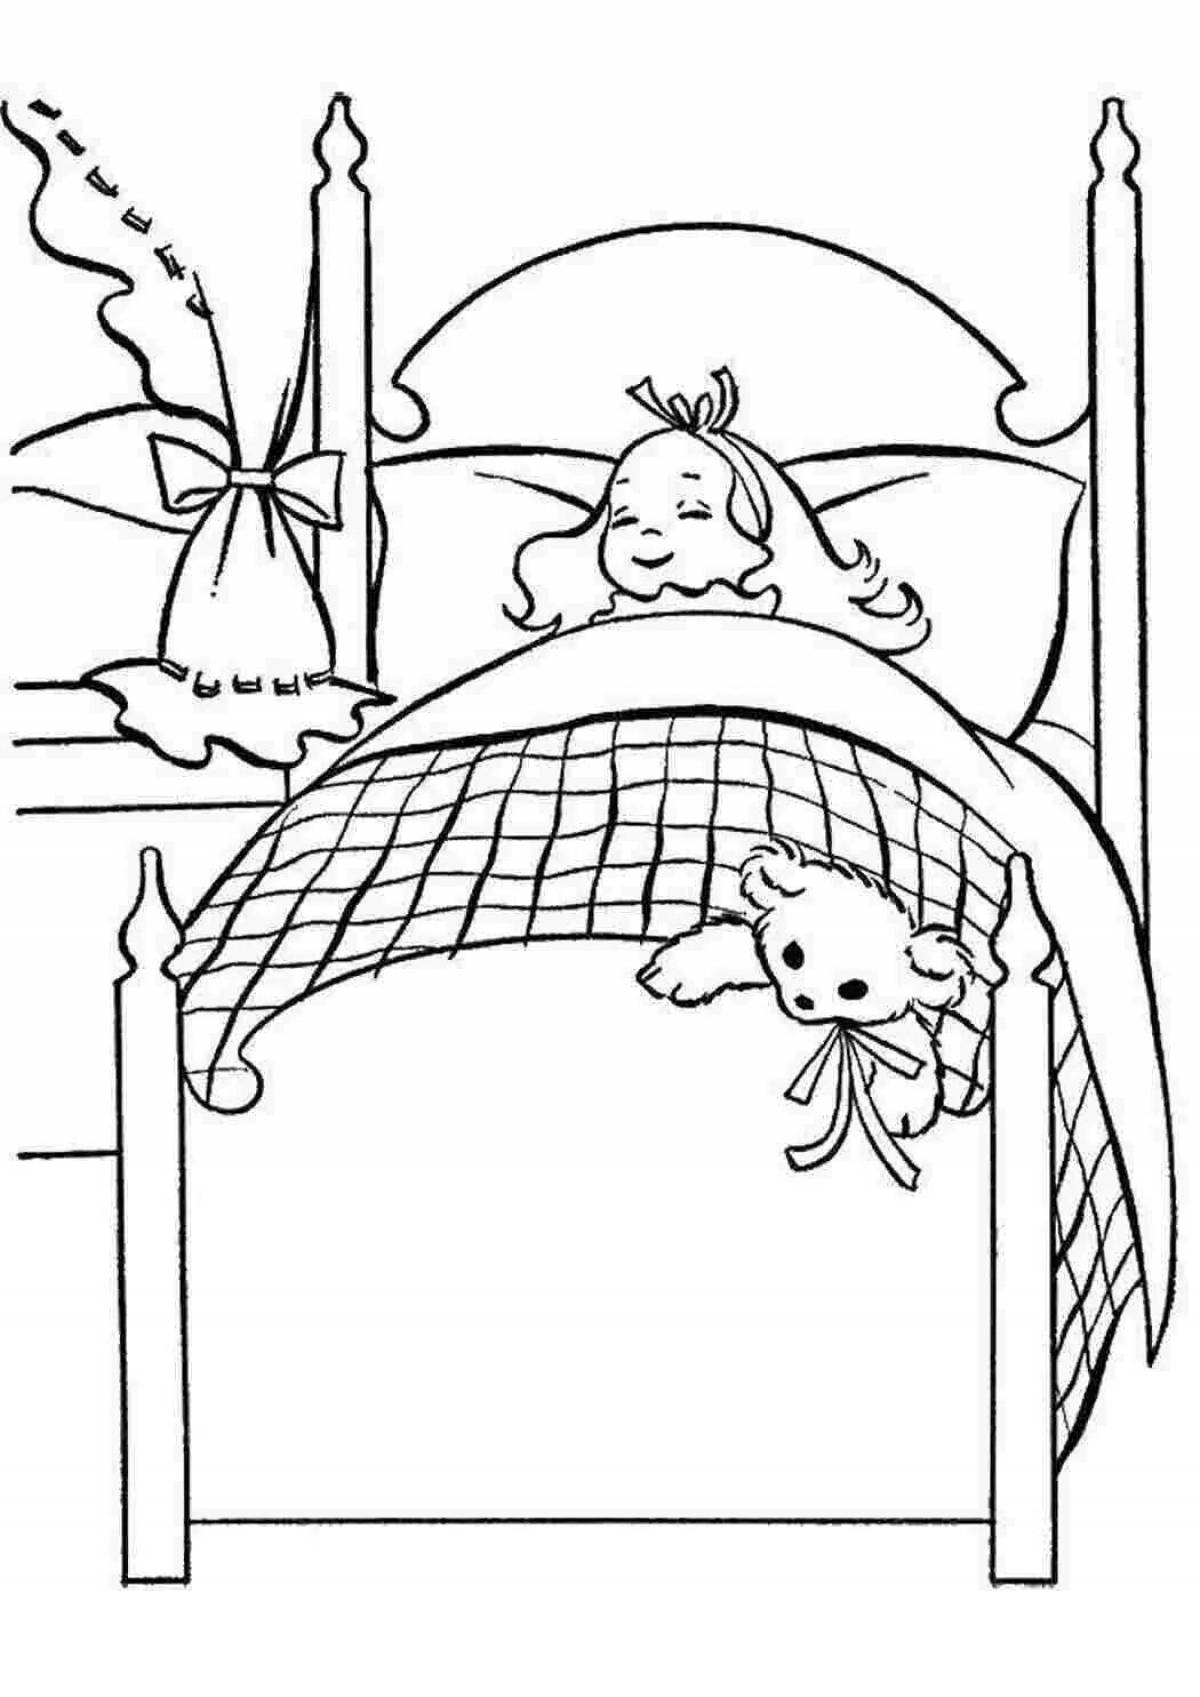 Coloring page cozy sleeping baby